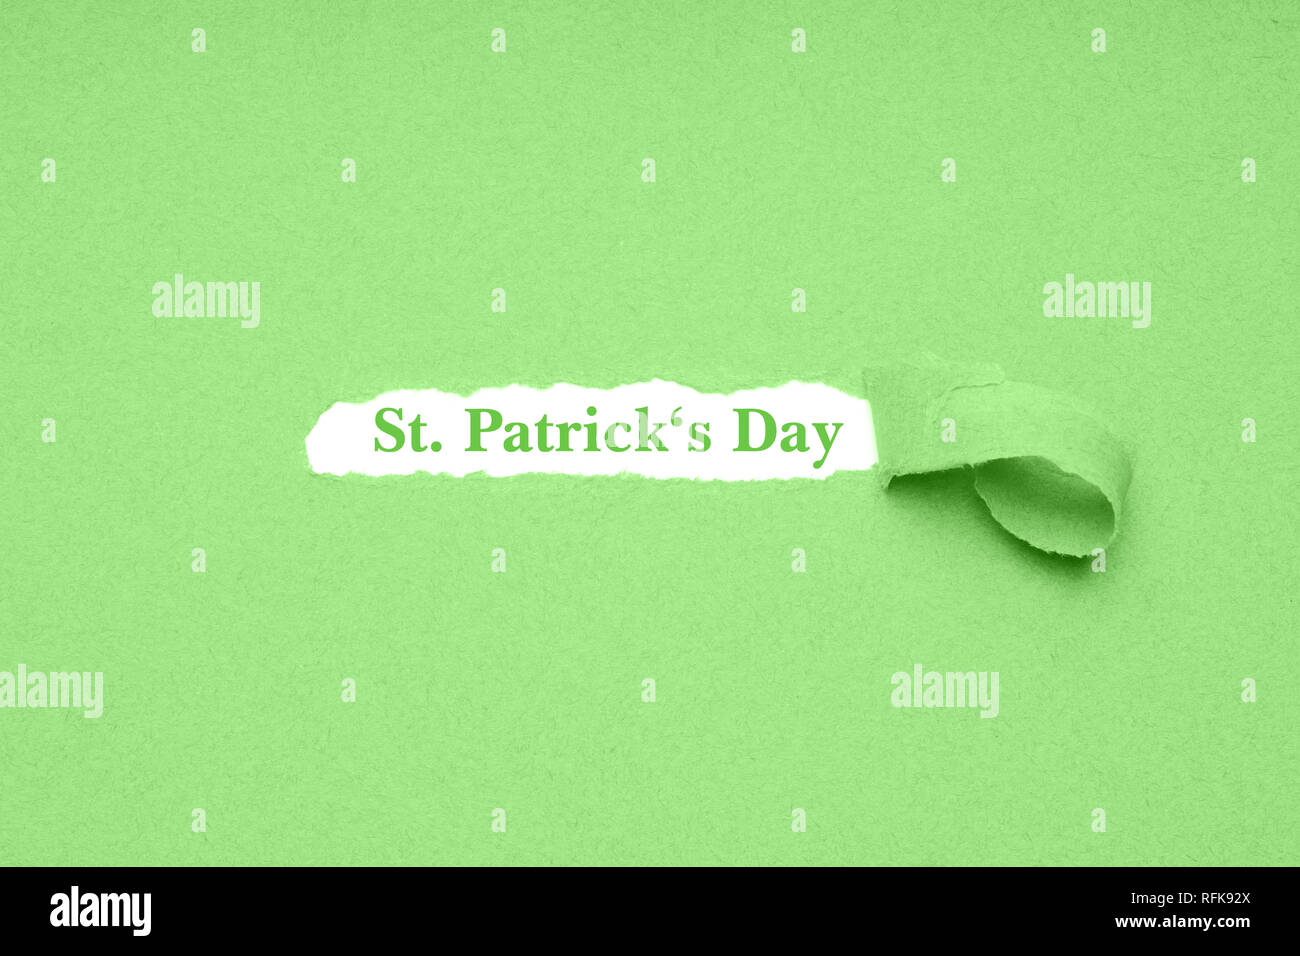 St. Patrick's Day is celebrated on March 17 Stock Photo